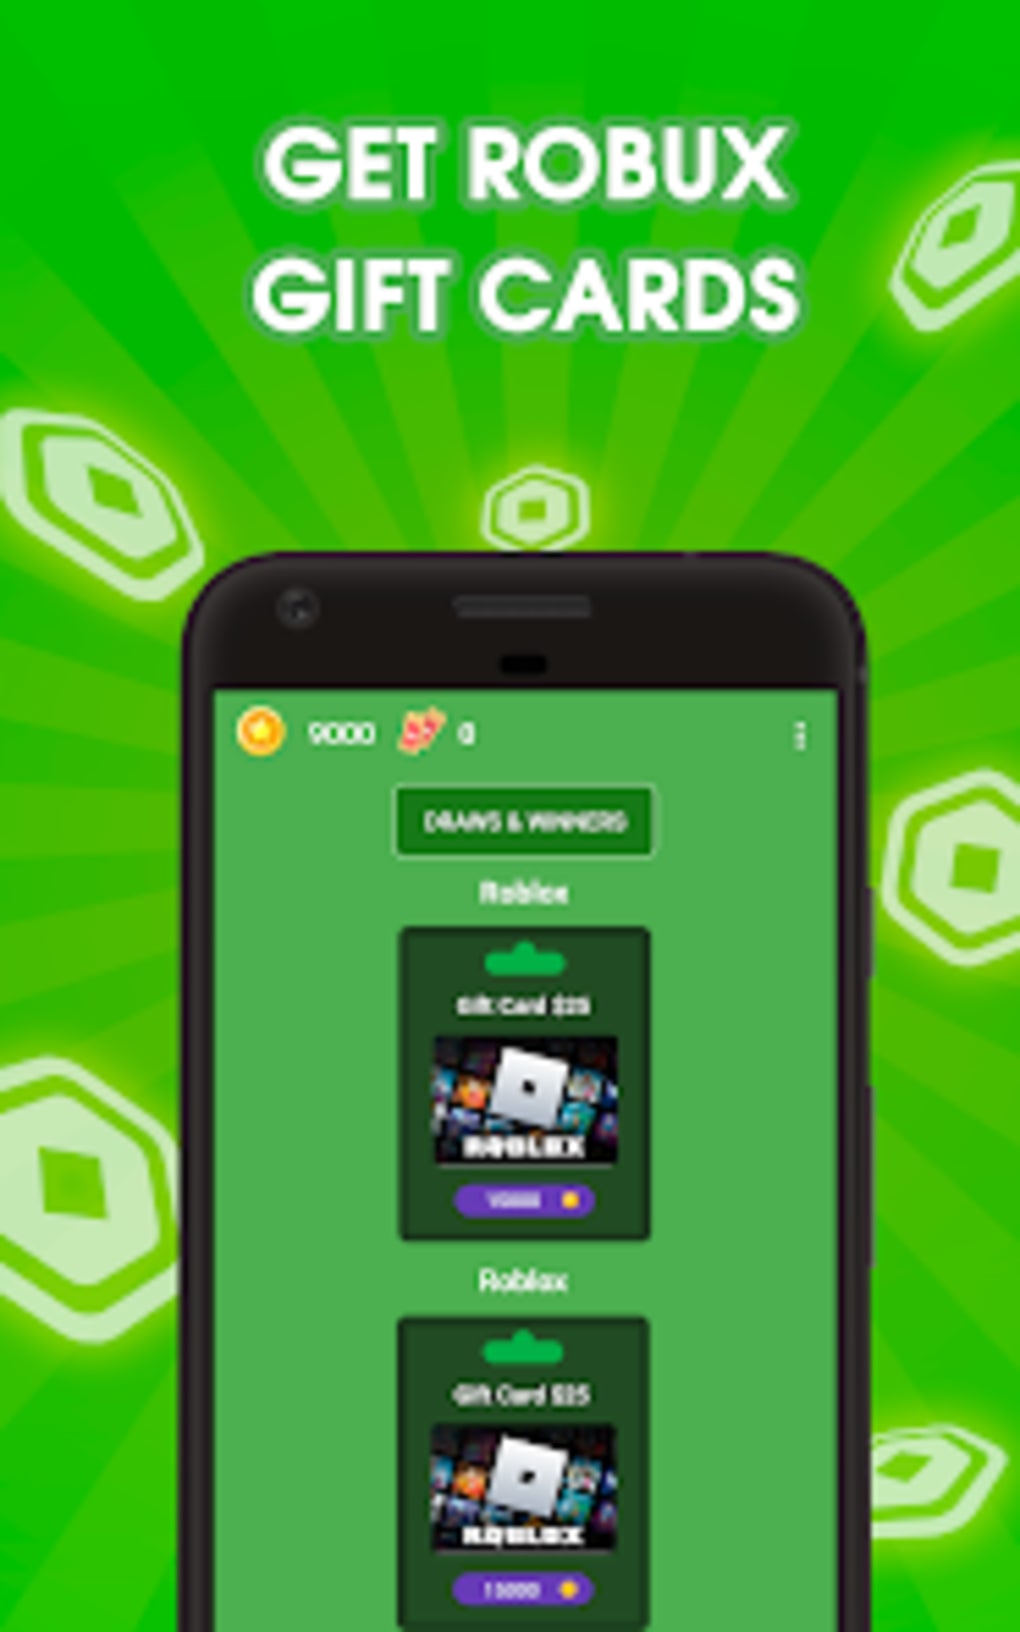 Download do APK de Free Robux : Gift Cards para Android